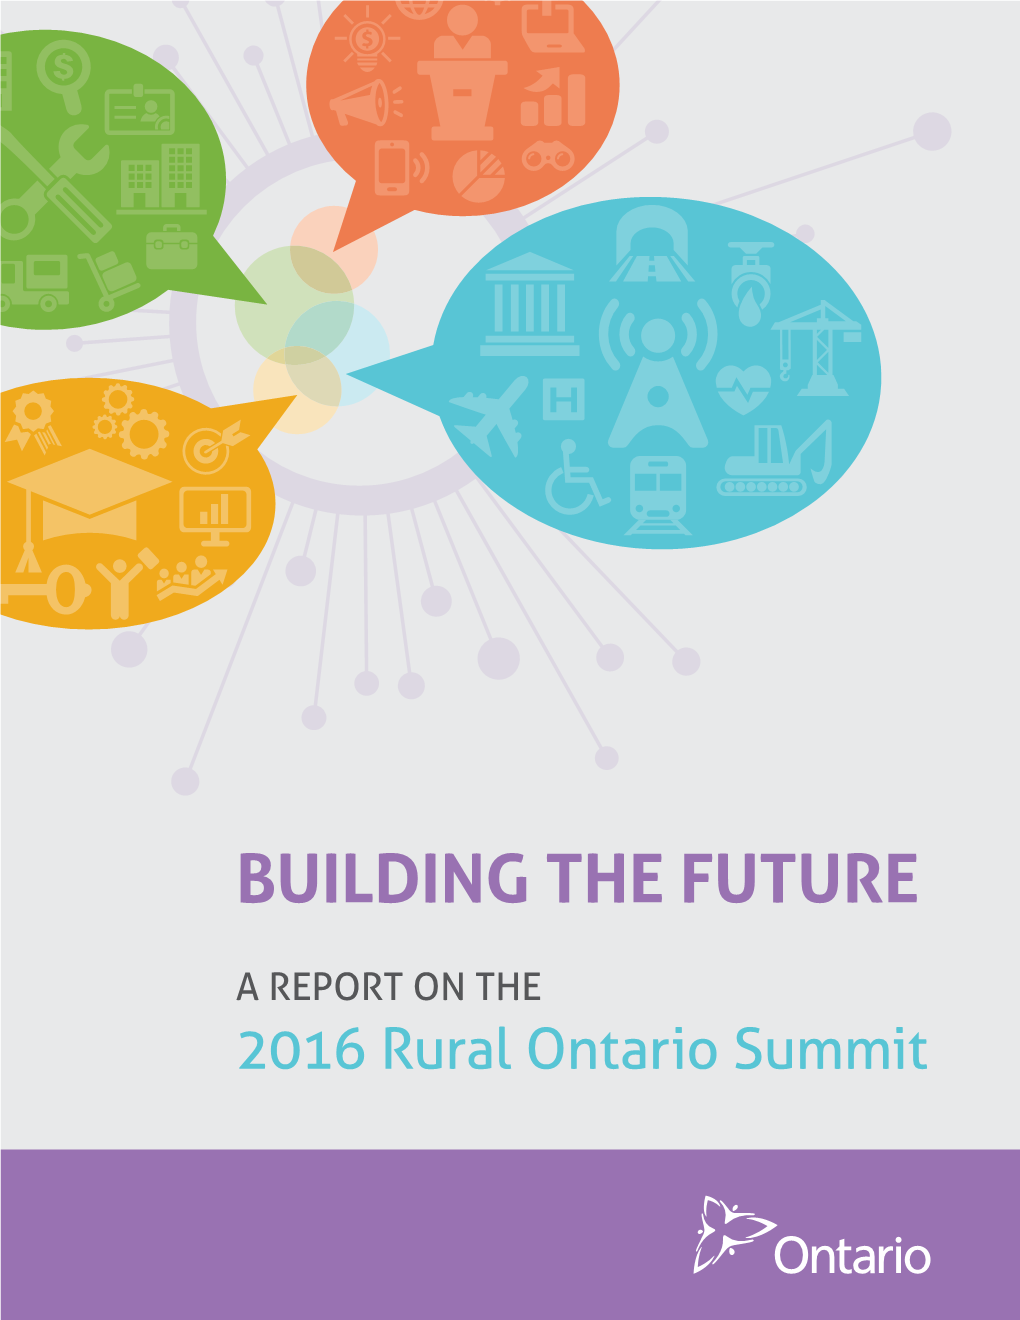 A REPORT on the 2016 Rural Ontario Summit